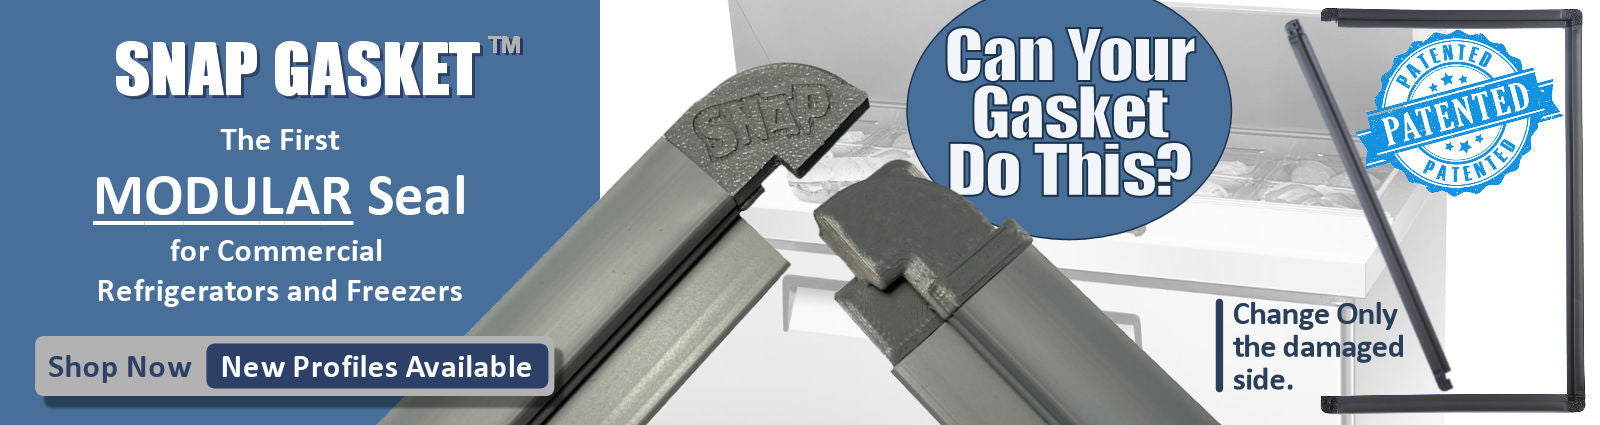 Link to Available Snap Gasket Modular Profiles for Refrigerators - Replace Only the Damaged Side